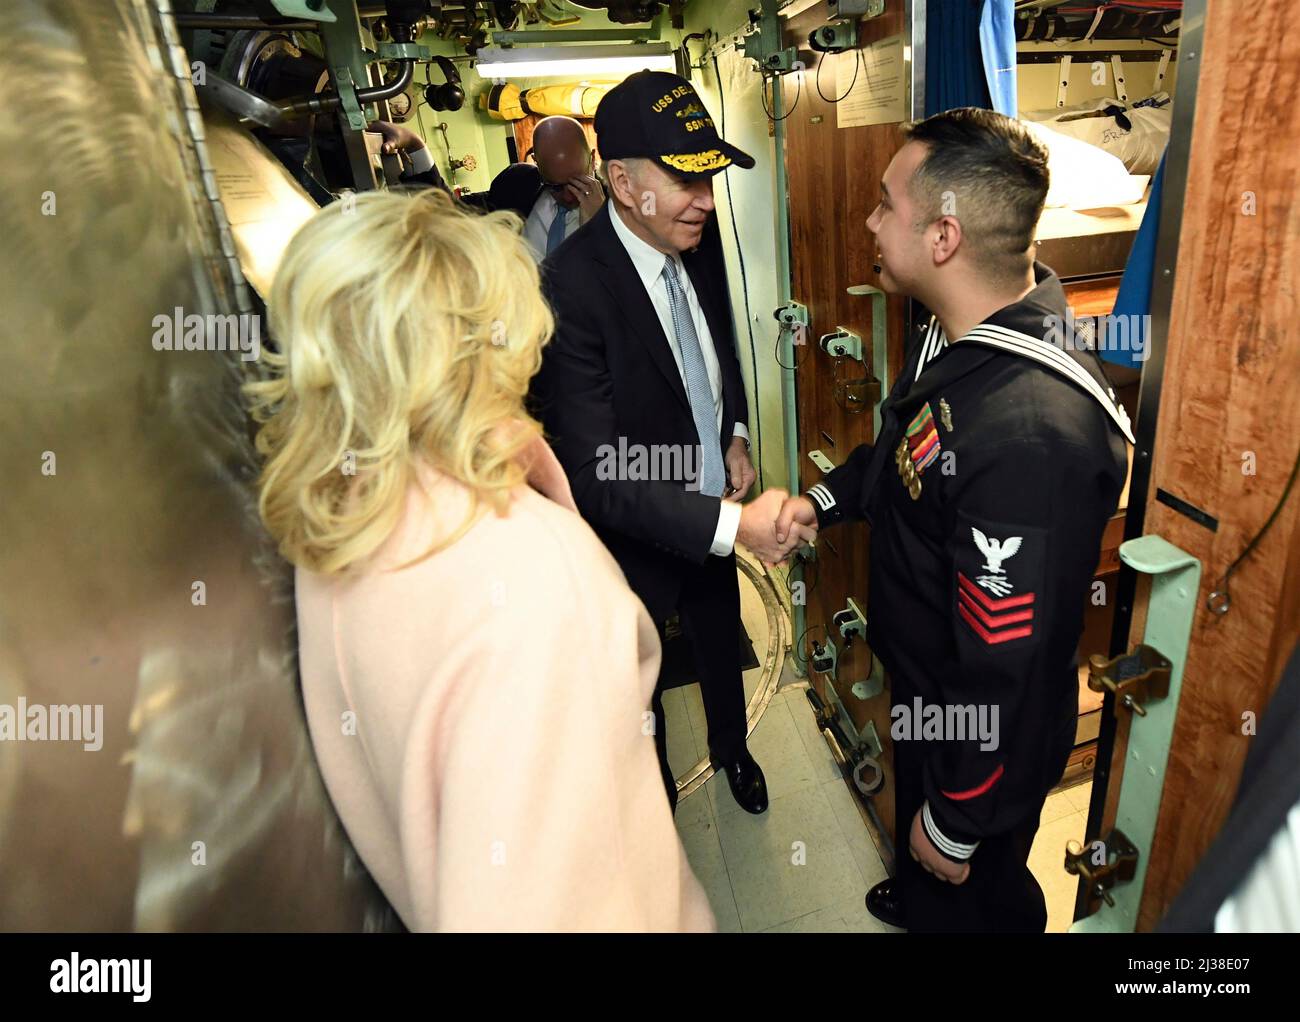 Wilmington, United States of America. 02 April, 2022. U.S President Joe Biden, center, and First Lady Jill Biden, left, greet PO1 David Jaimeruiz during a tour of the Virginia-class attack submarine USS Delaware following the commissioning ceremony, April 2, 2022 in Wilmington, Delaware.  Credit: CPO Joshua Karsten/White House Photo/Alamy Live News Stock Photo